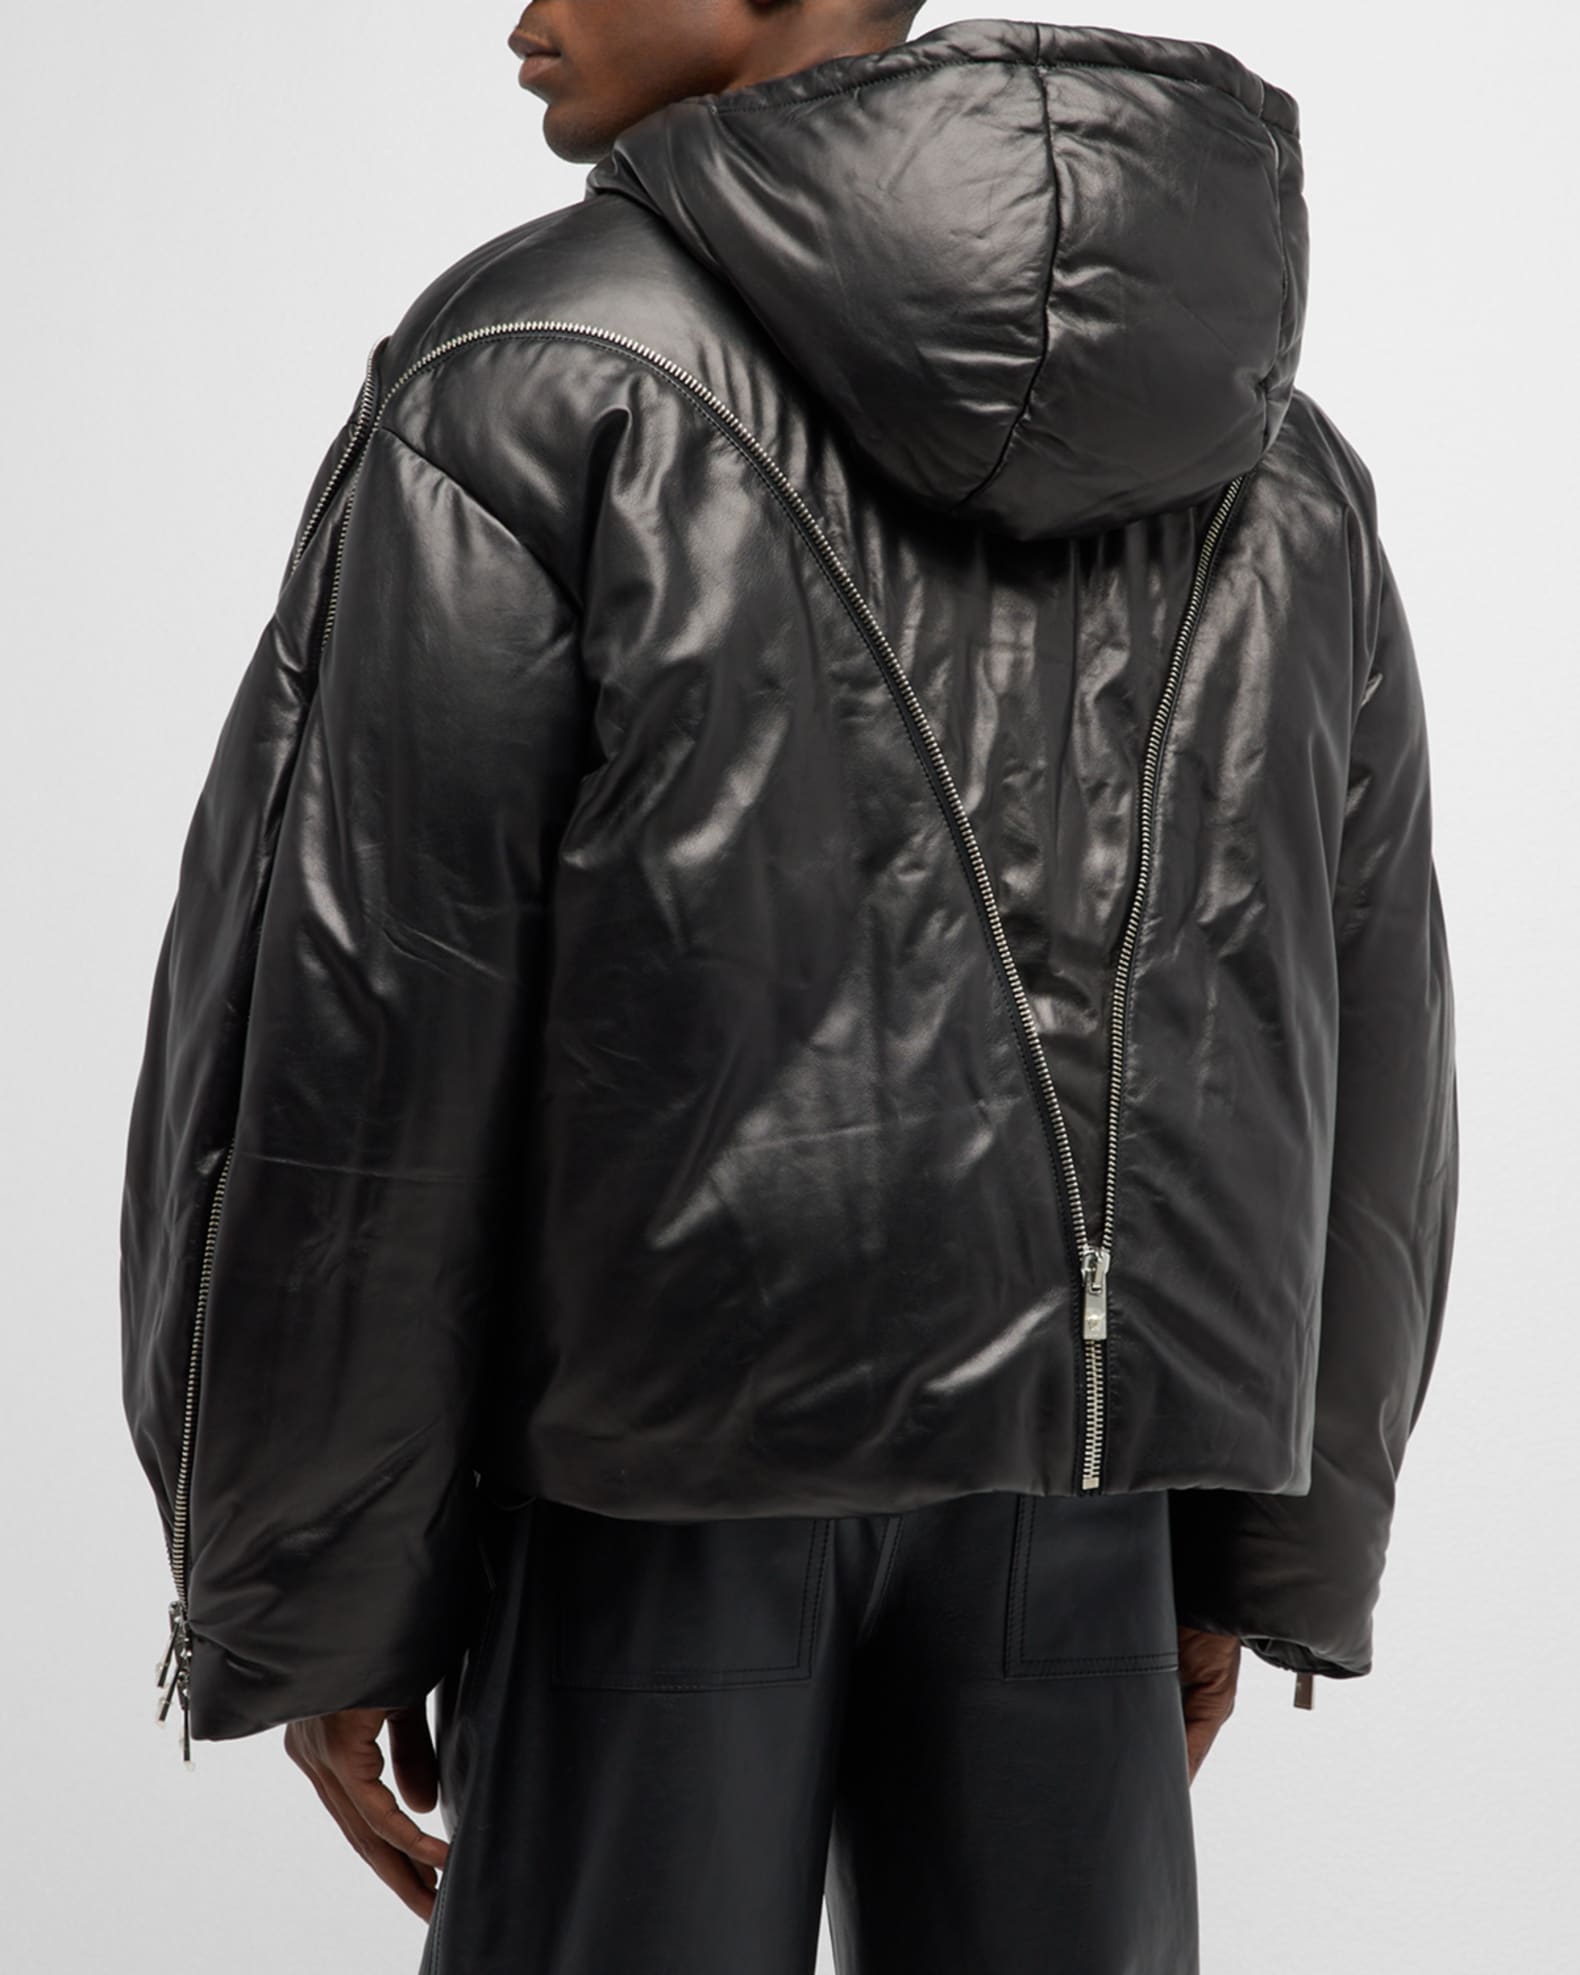 Versace Men's Leather Down Jacket with Zippers